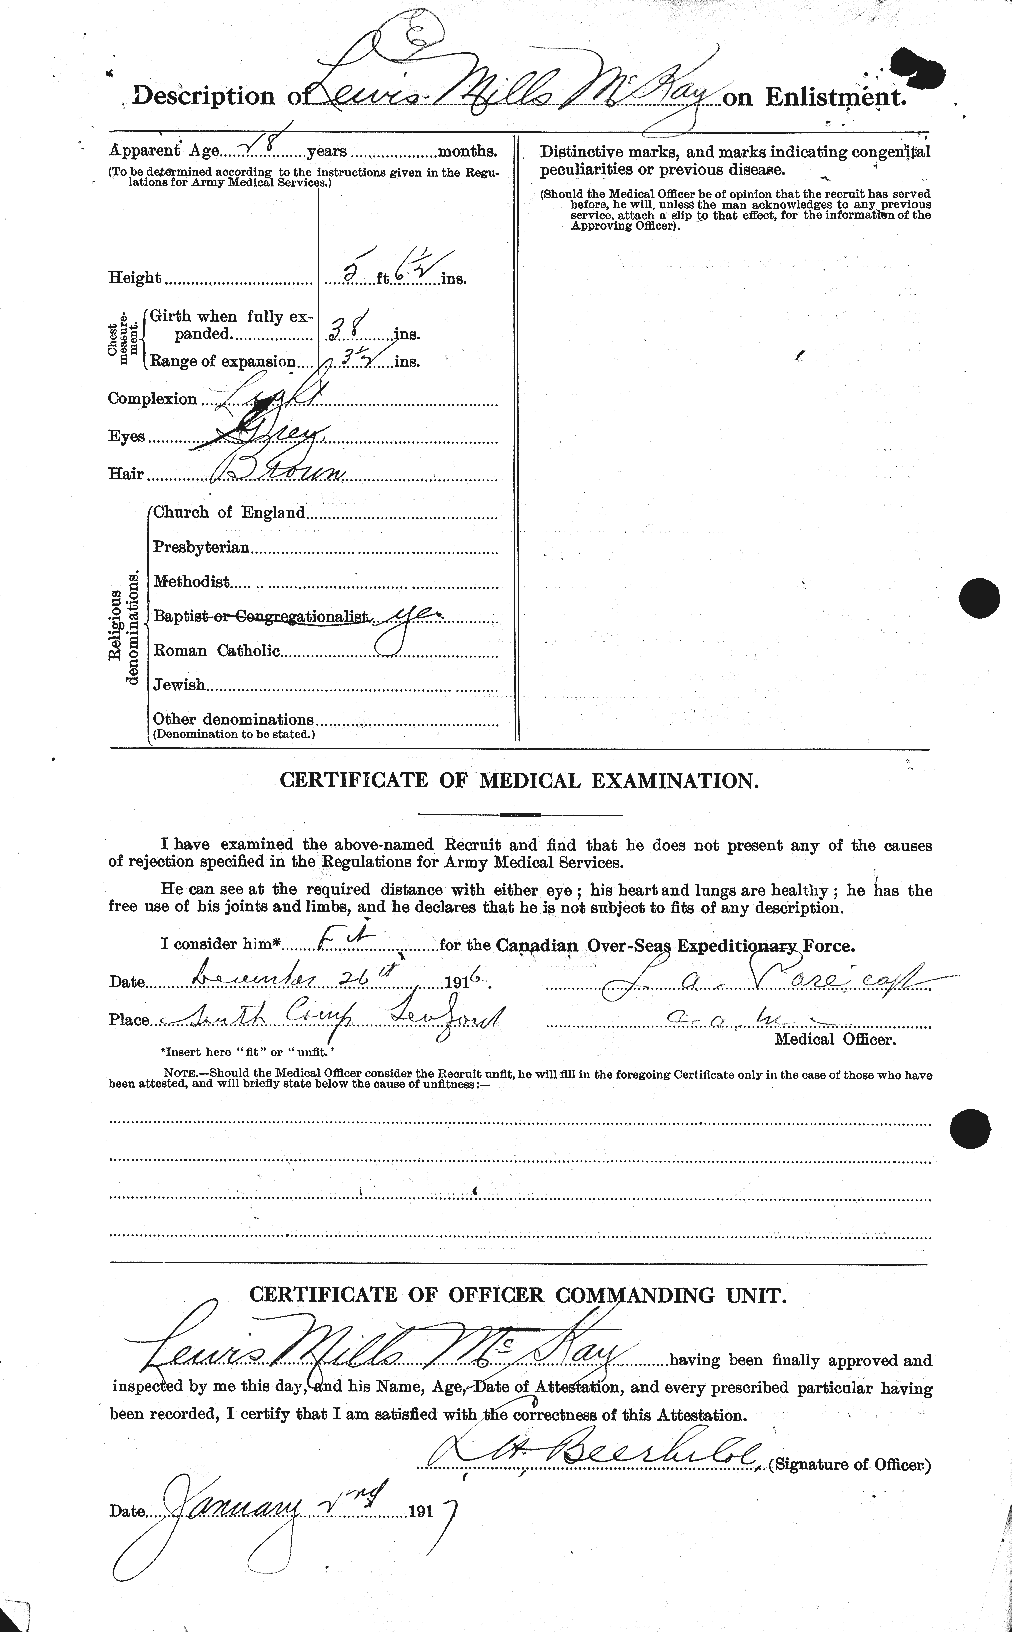 Personnel Records of the First World War - CEF 527152b